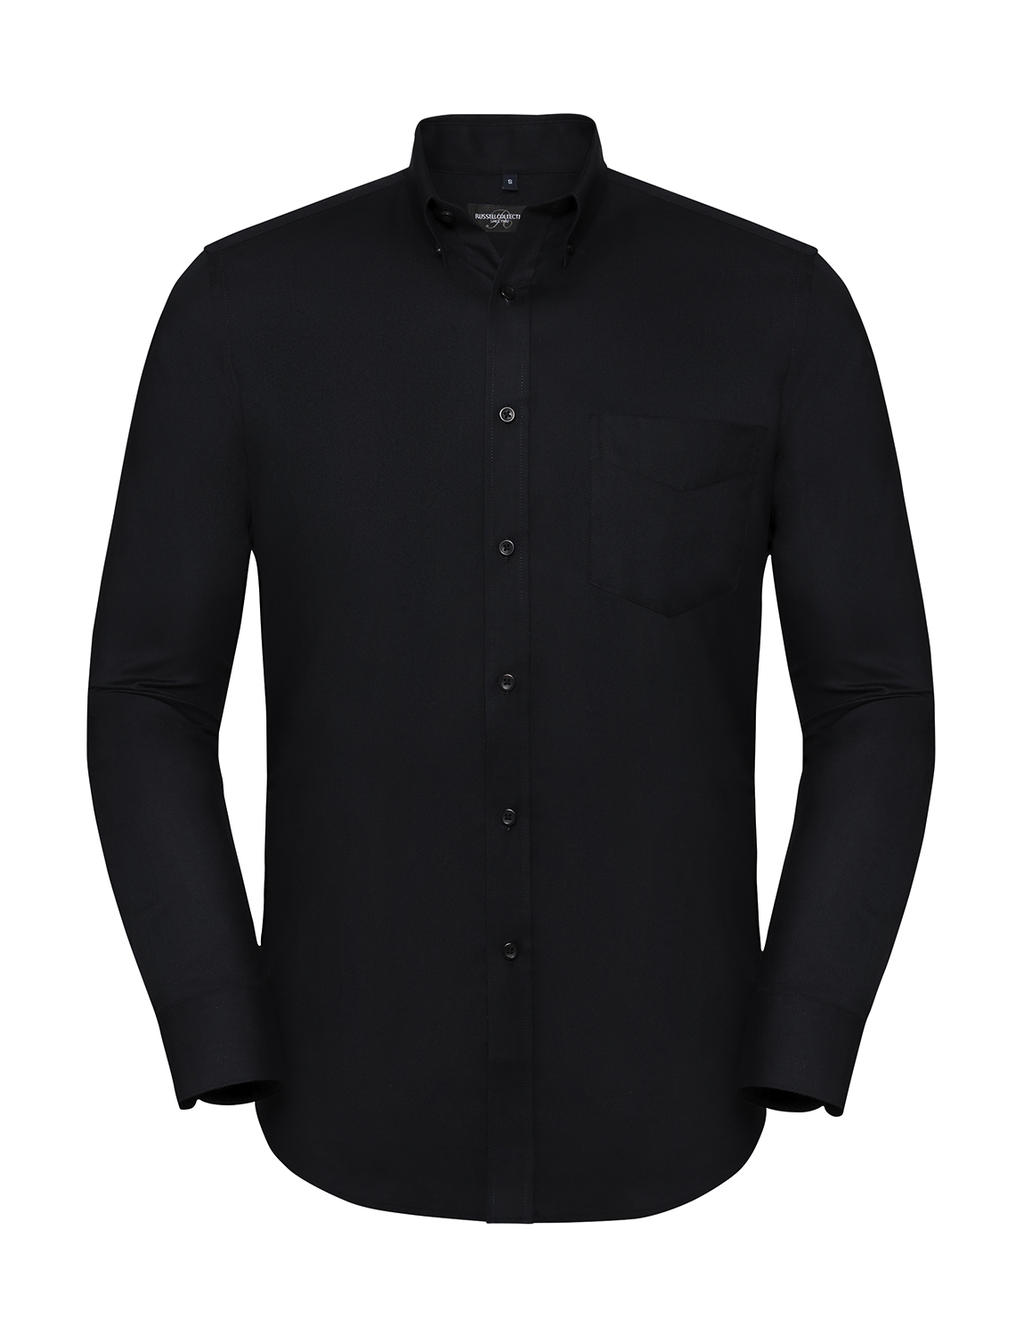  Mens LS Tailored Button-Down Oxford Shirt in Farbe Black